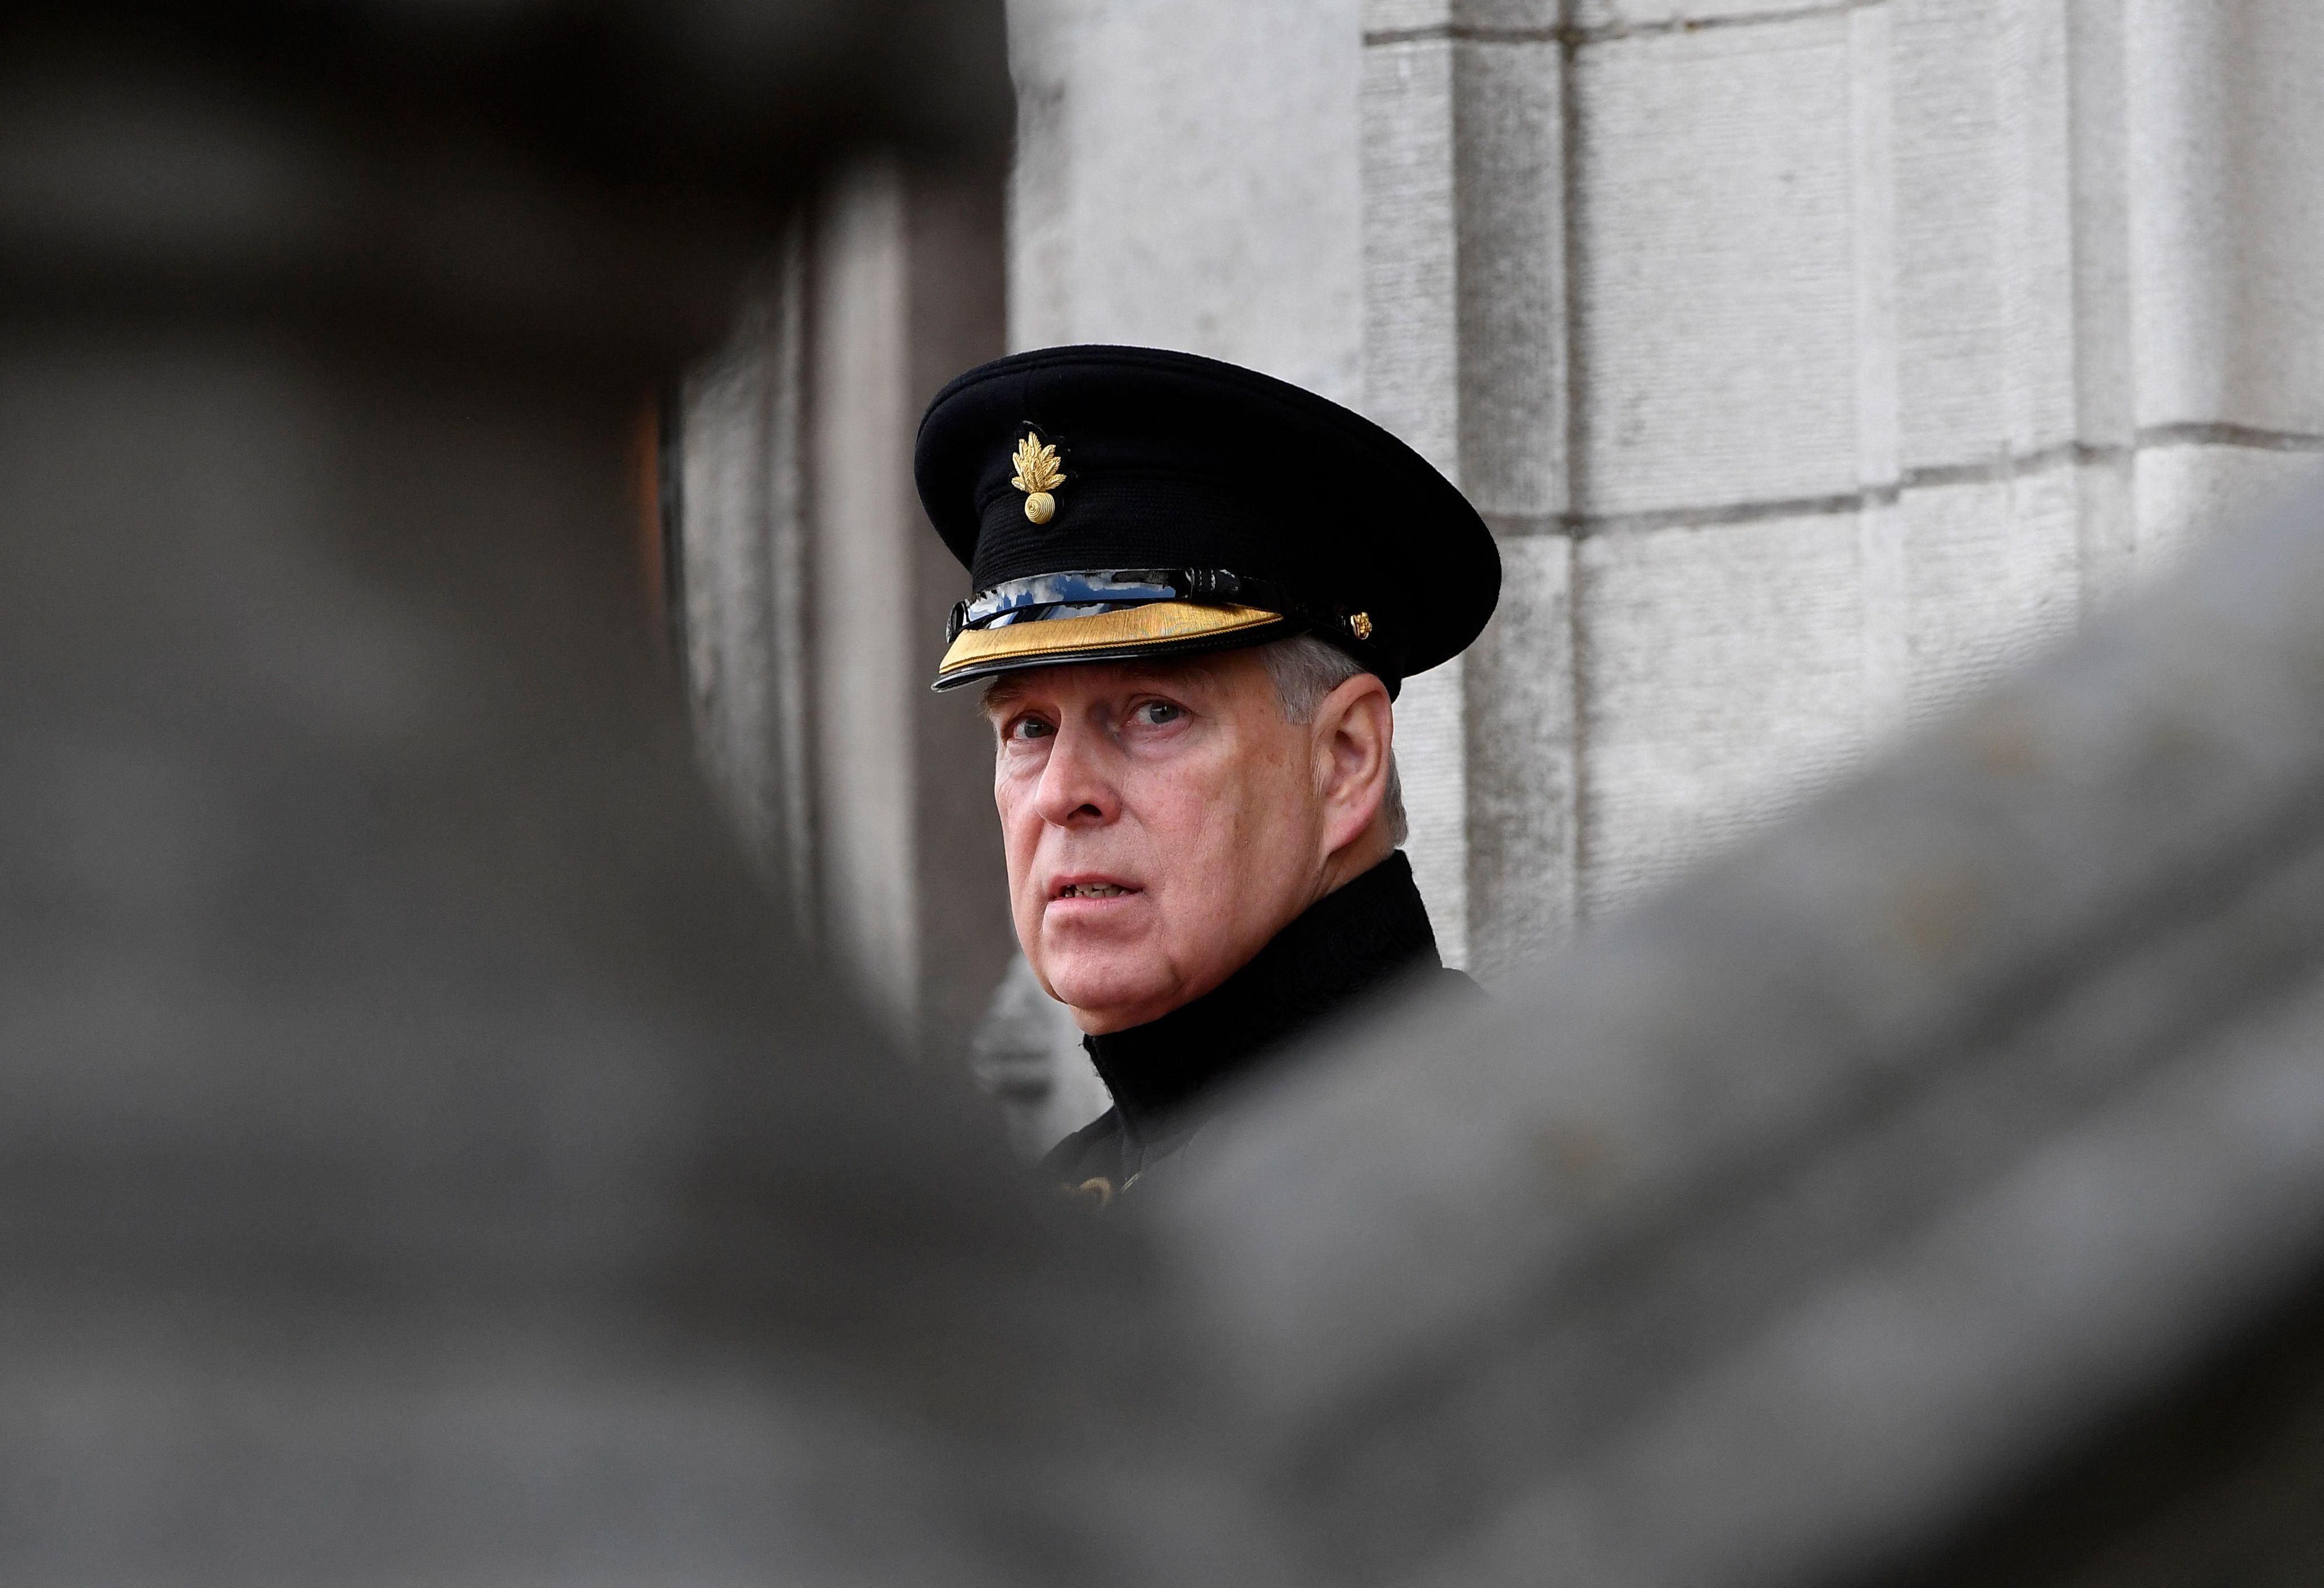 Prince Andrew, Duke of York, has always denied the allegations against him